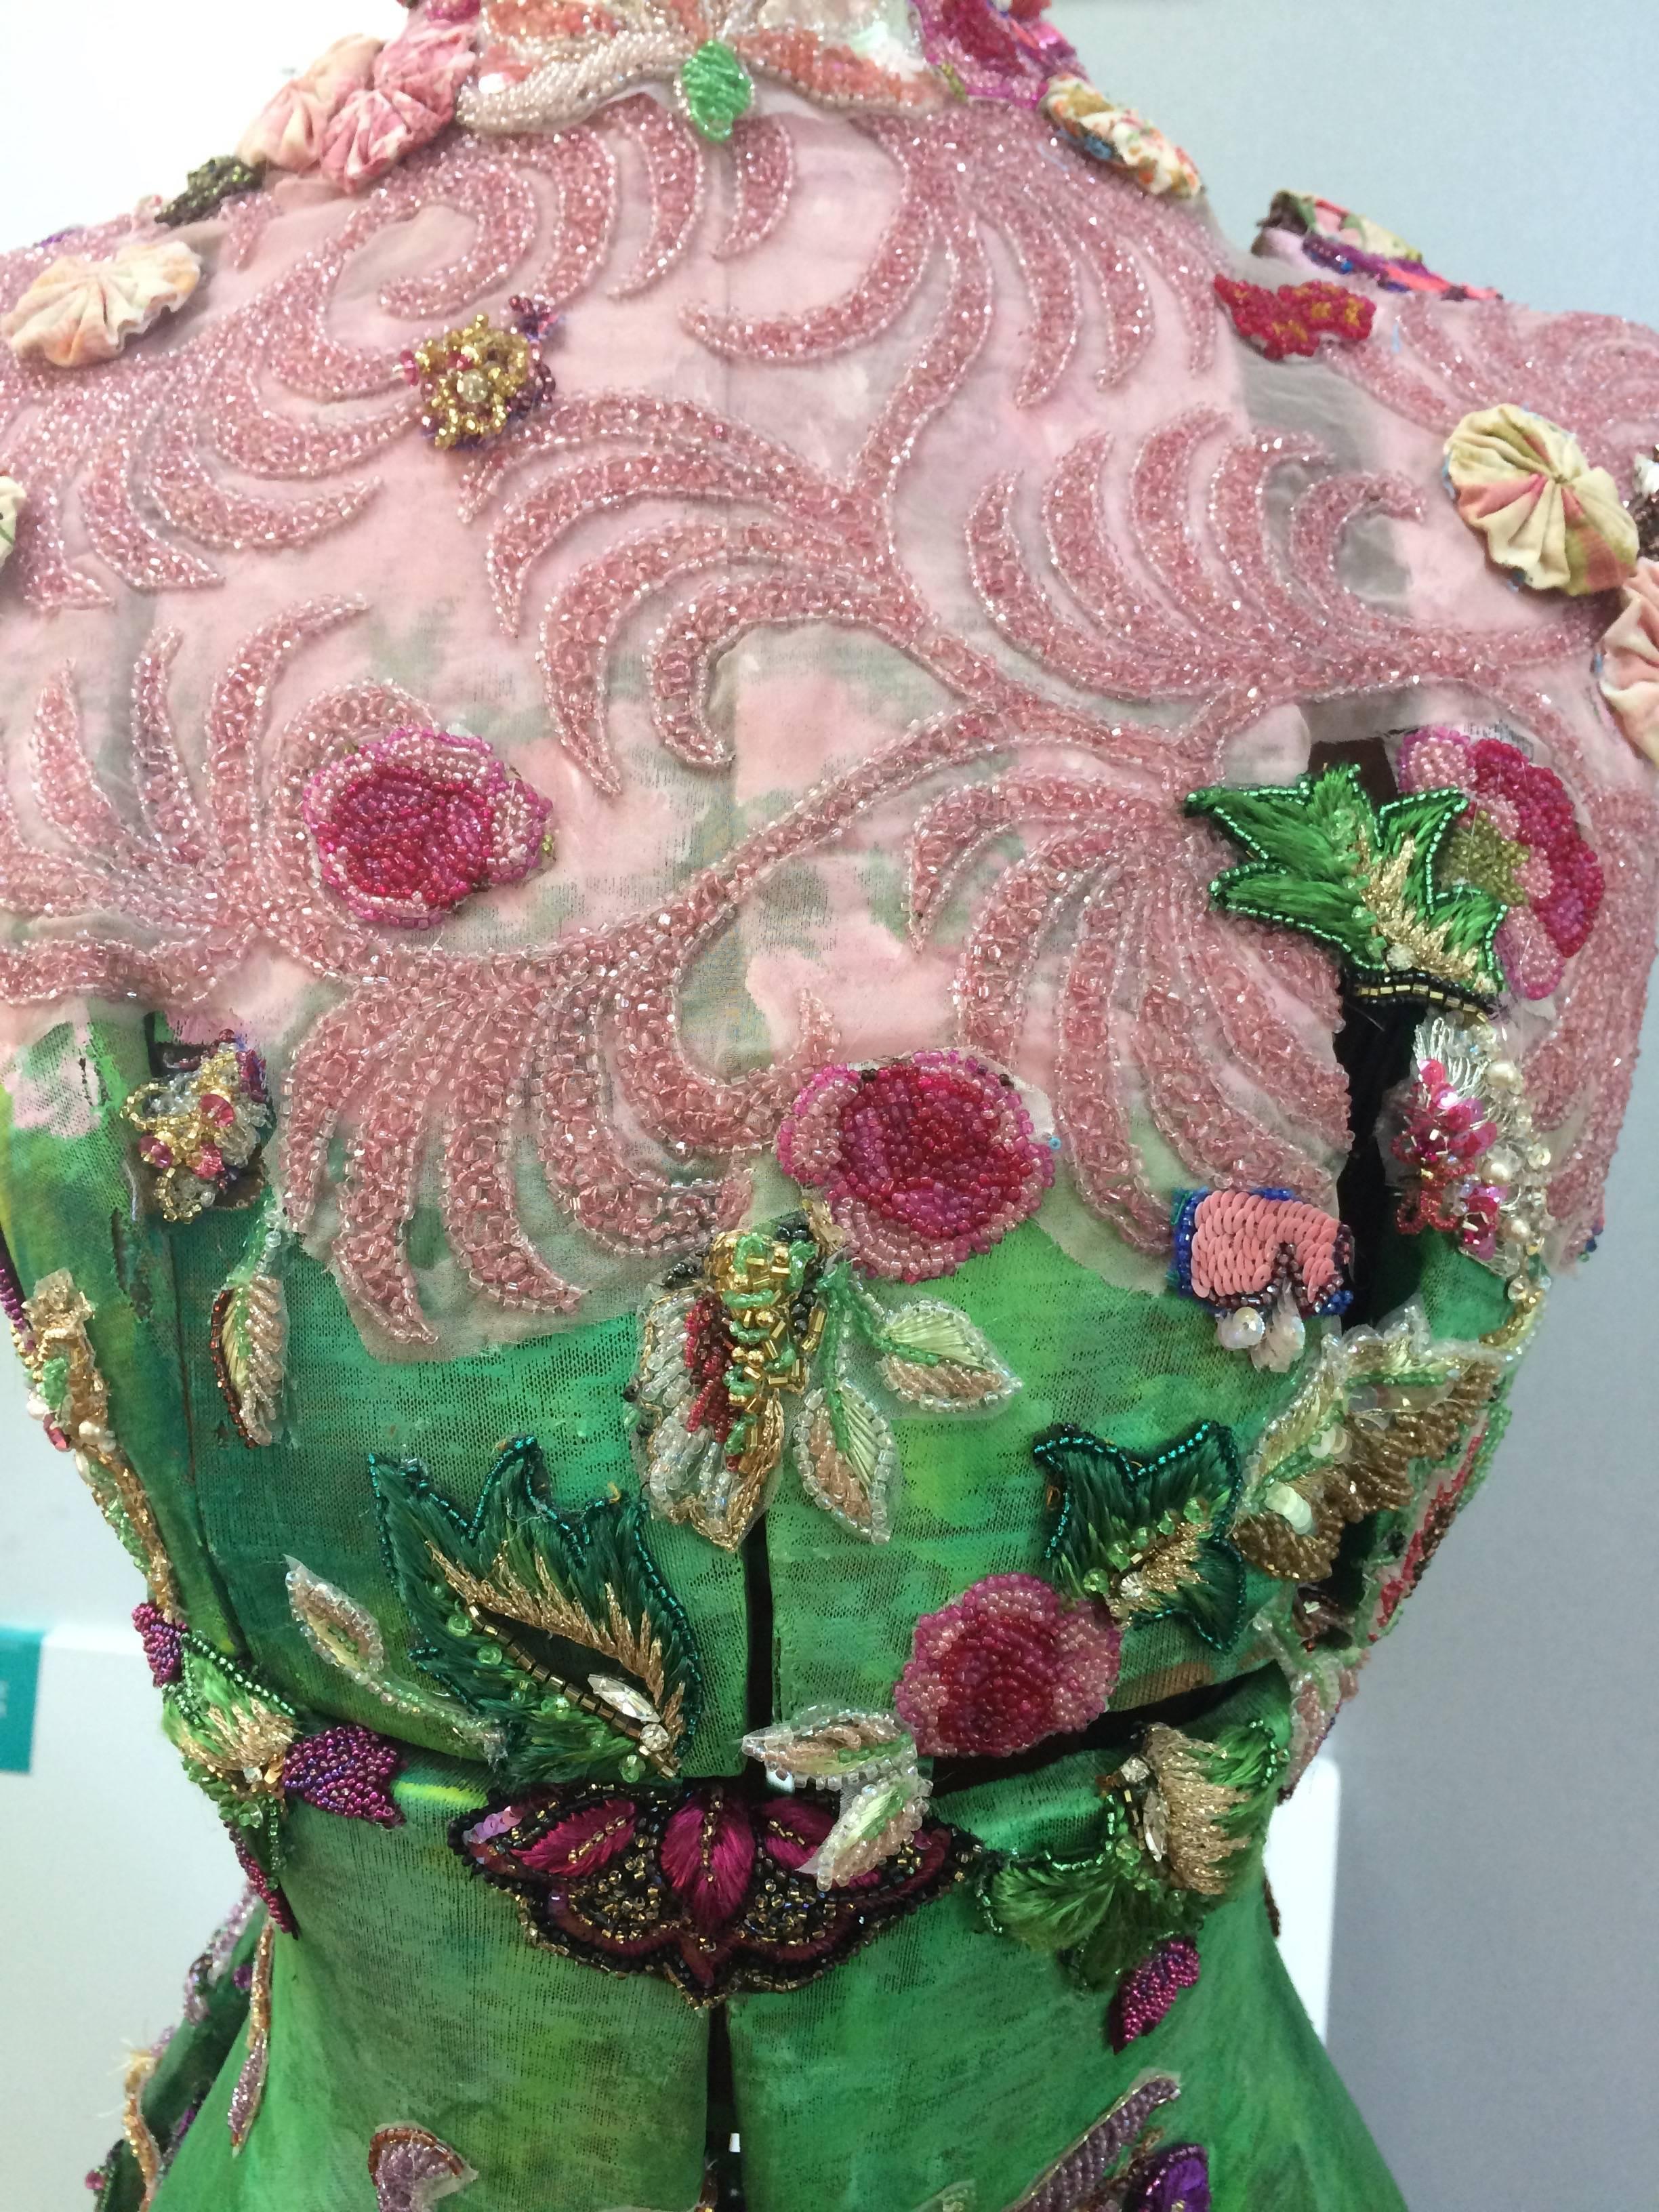 A gorgeously imaginative mixed-media assemblage sculpture that captures the vitality and colors of a Spring garden inspired by the magnolia tree in bloom outside the artist's studio. The object is a vintage dress form that has been painted and